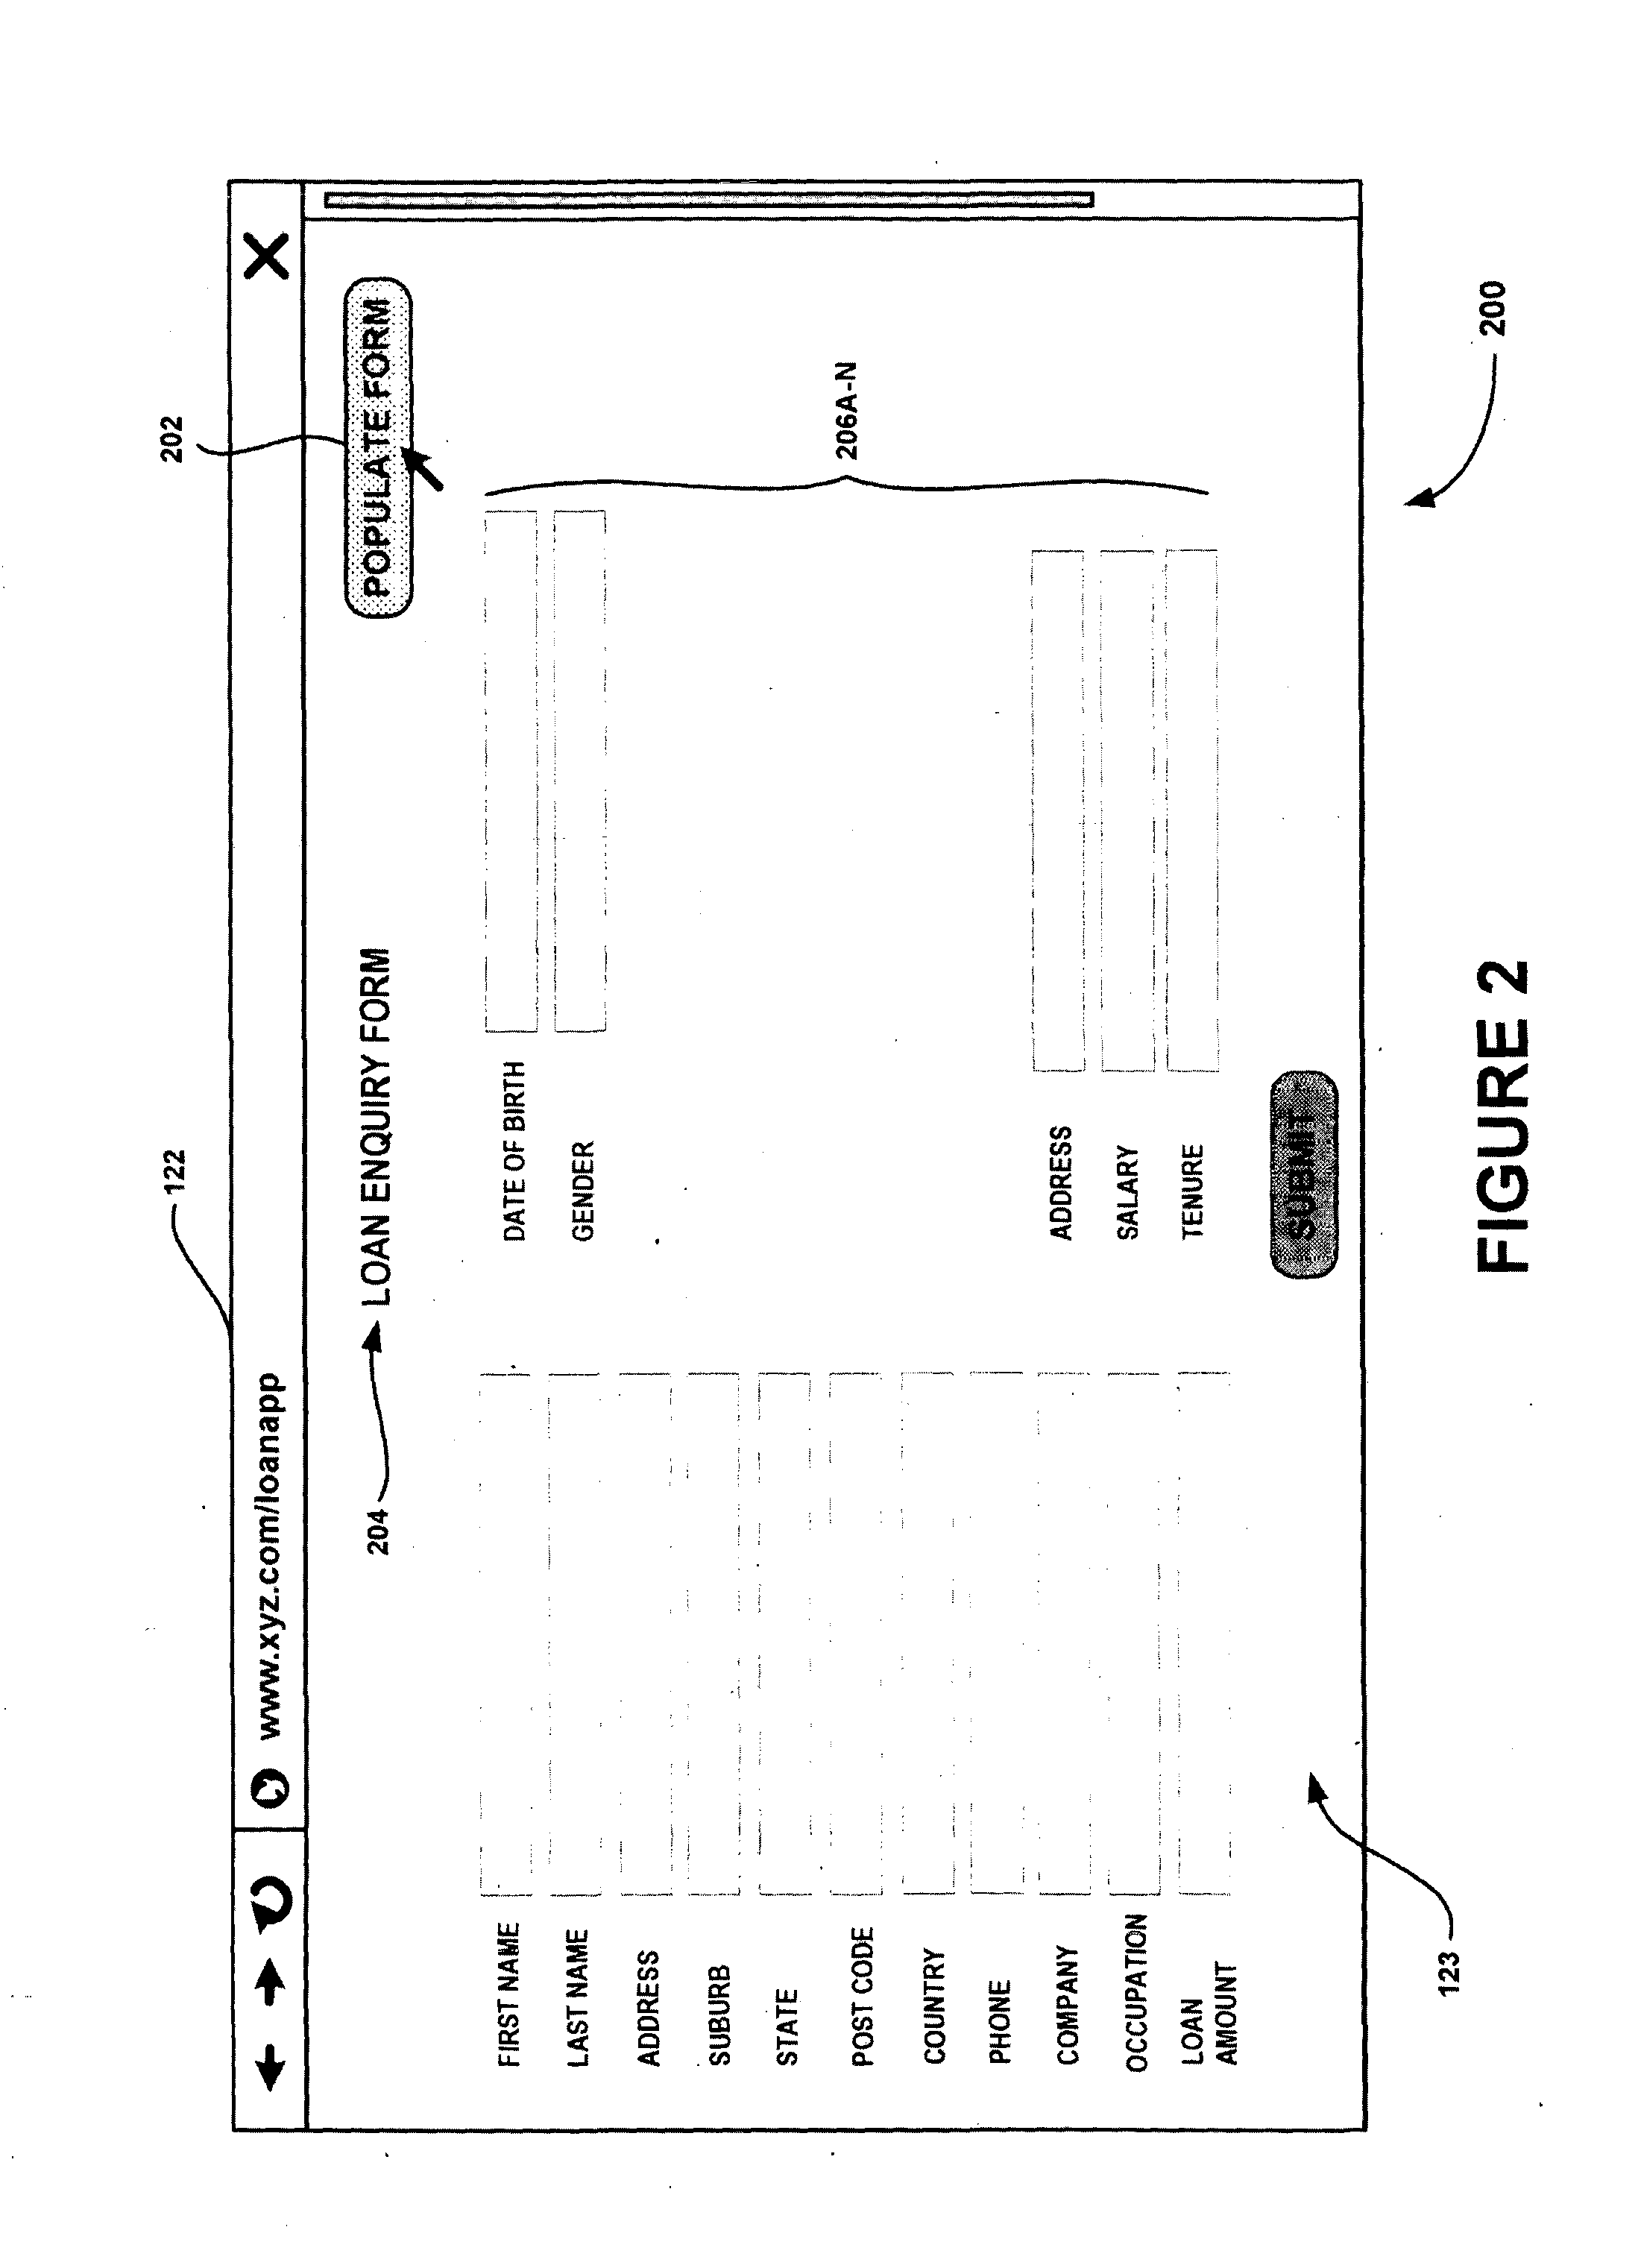 Method and system for secured communication of personal information